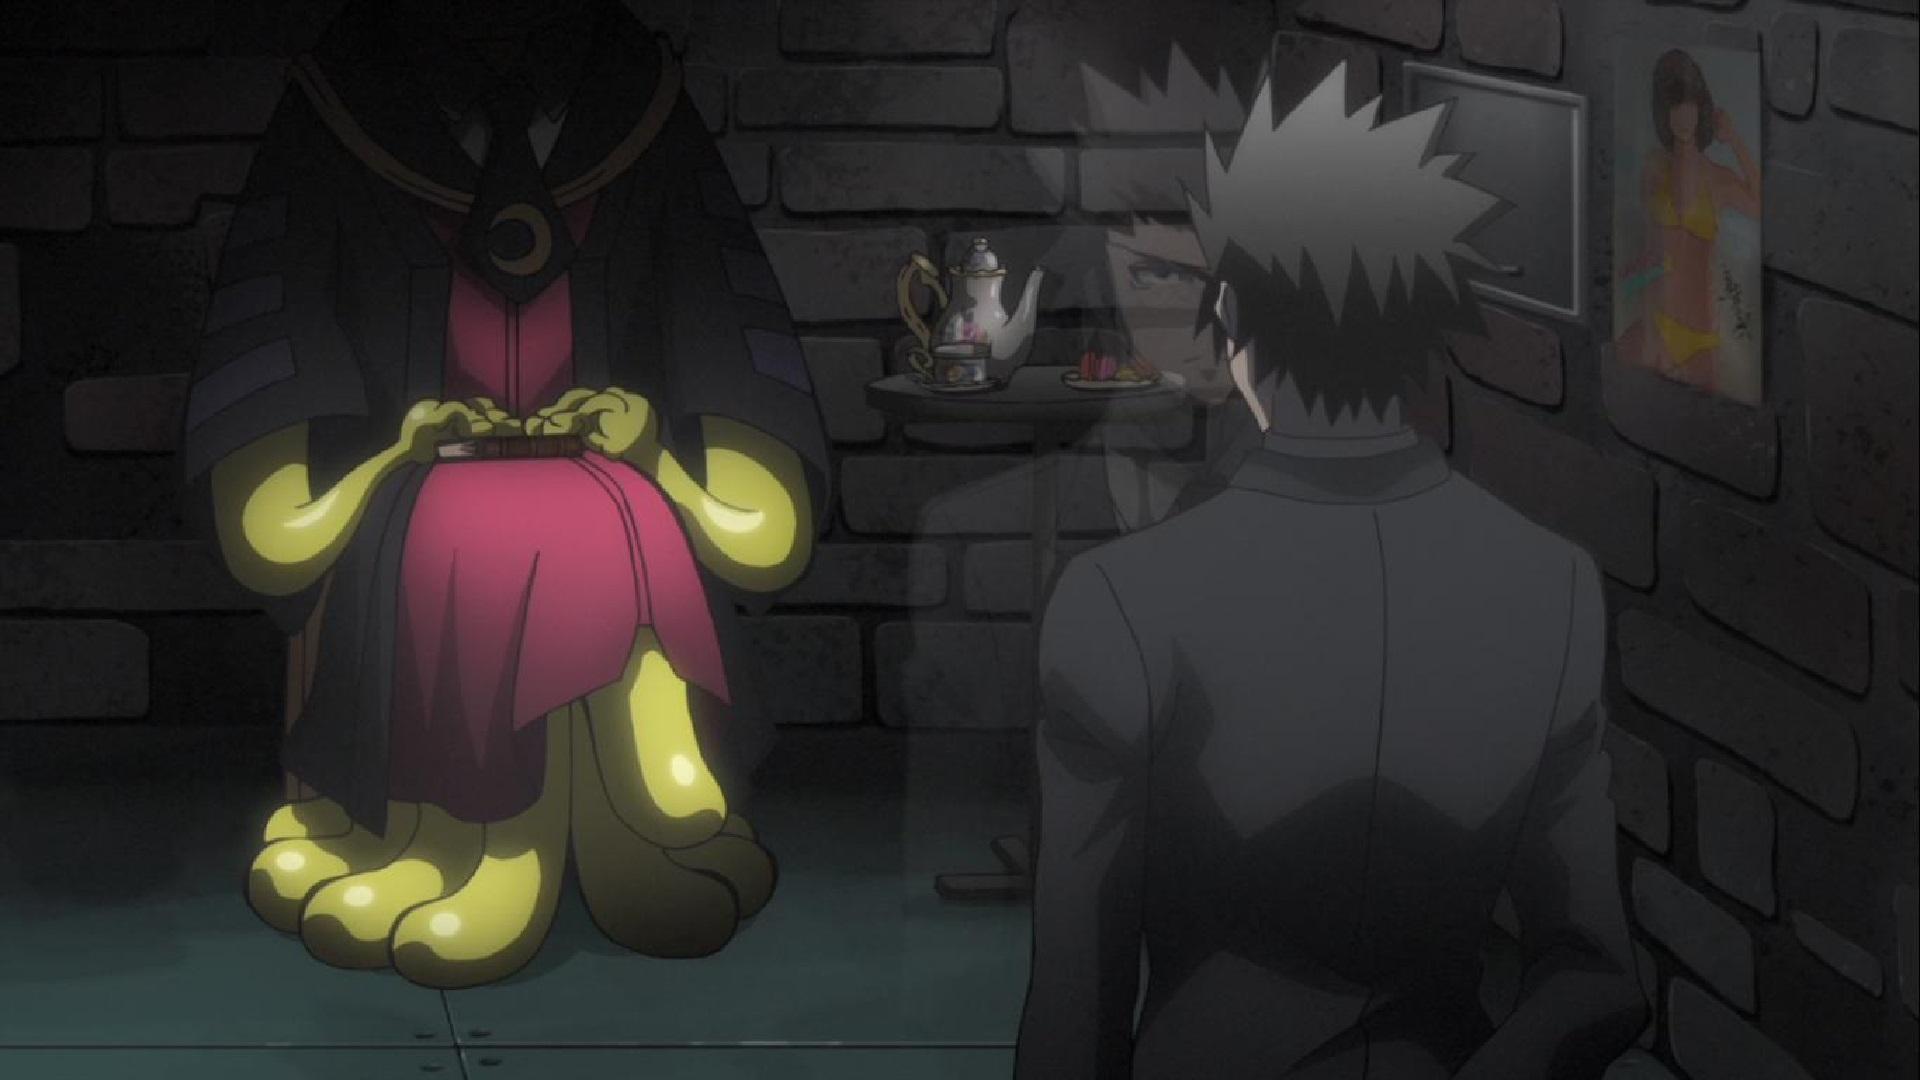 Assassination Classroom: Meeting Time